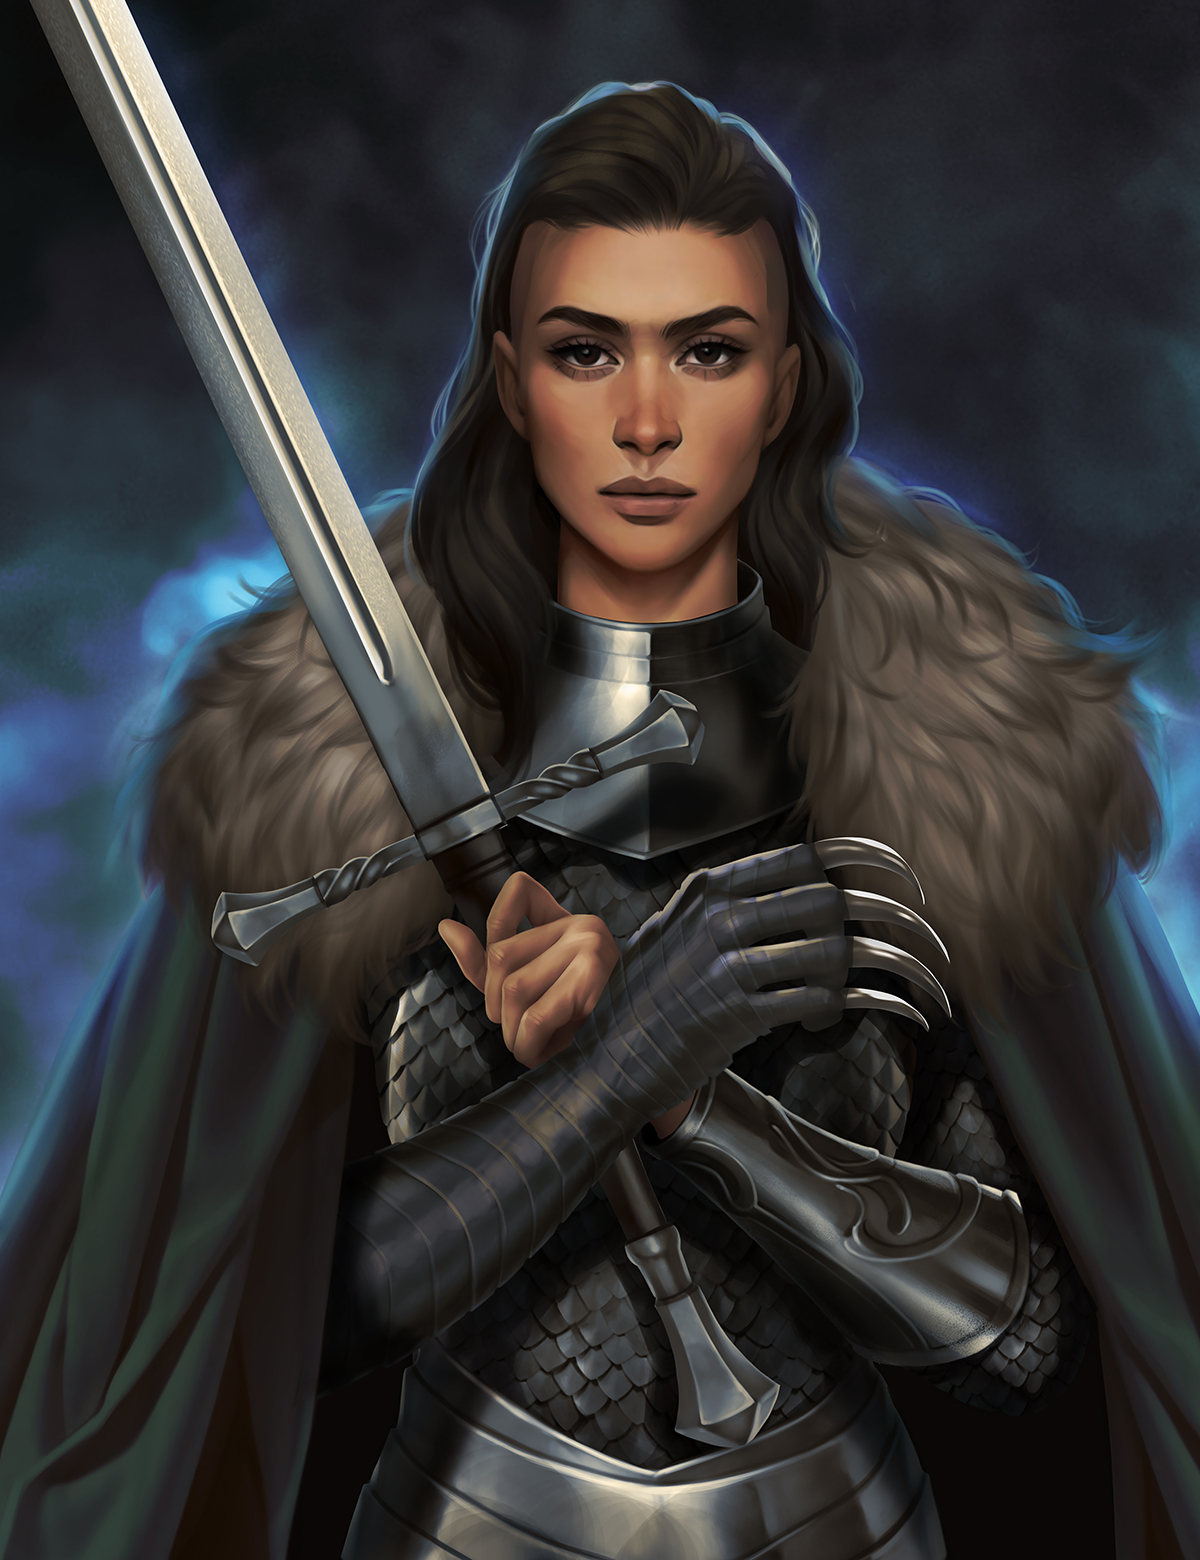 Hekla from the Bloodaxe Crew wearing viking armor, her prosthetic arm crossed with her sword over her chest